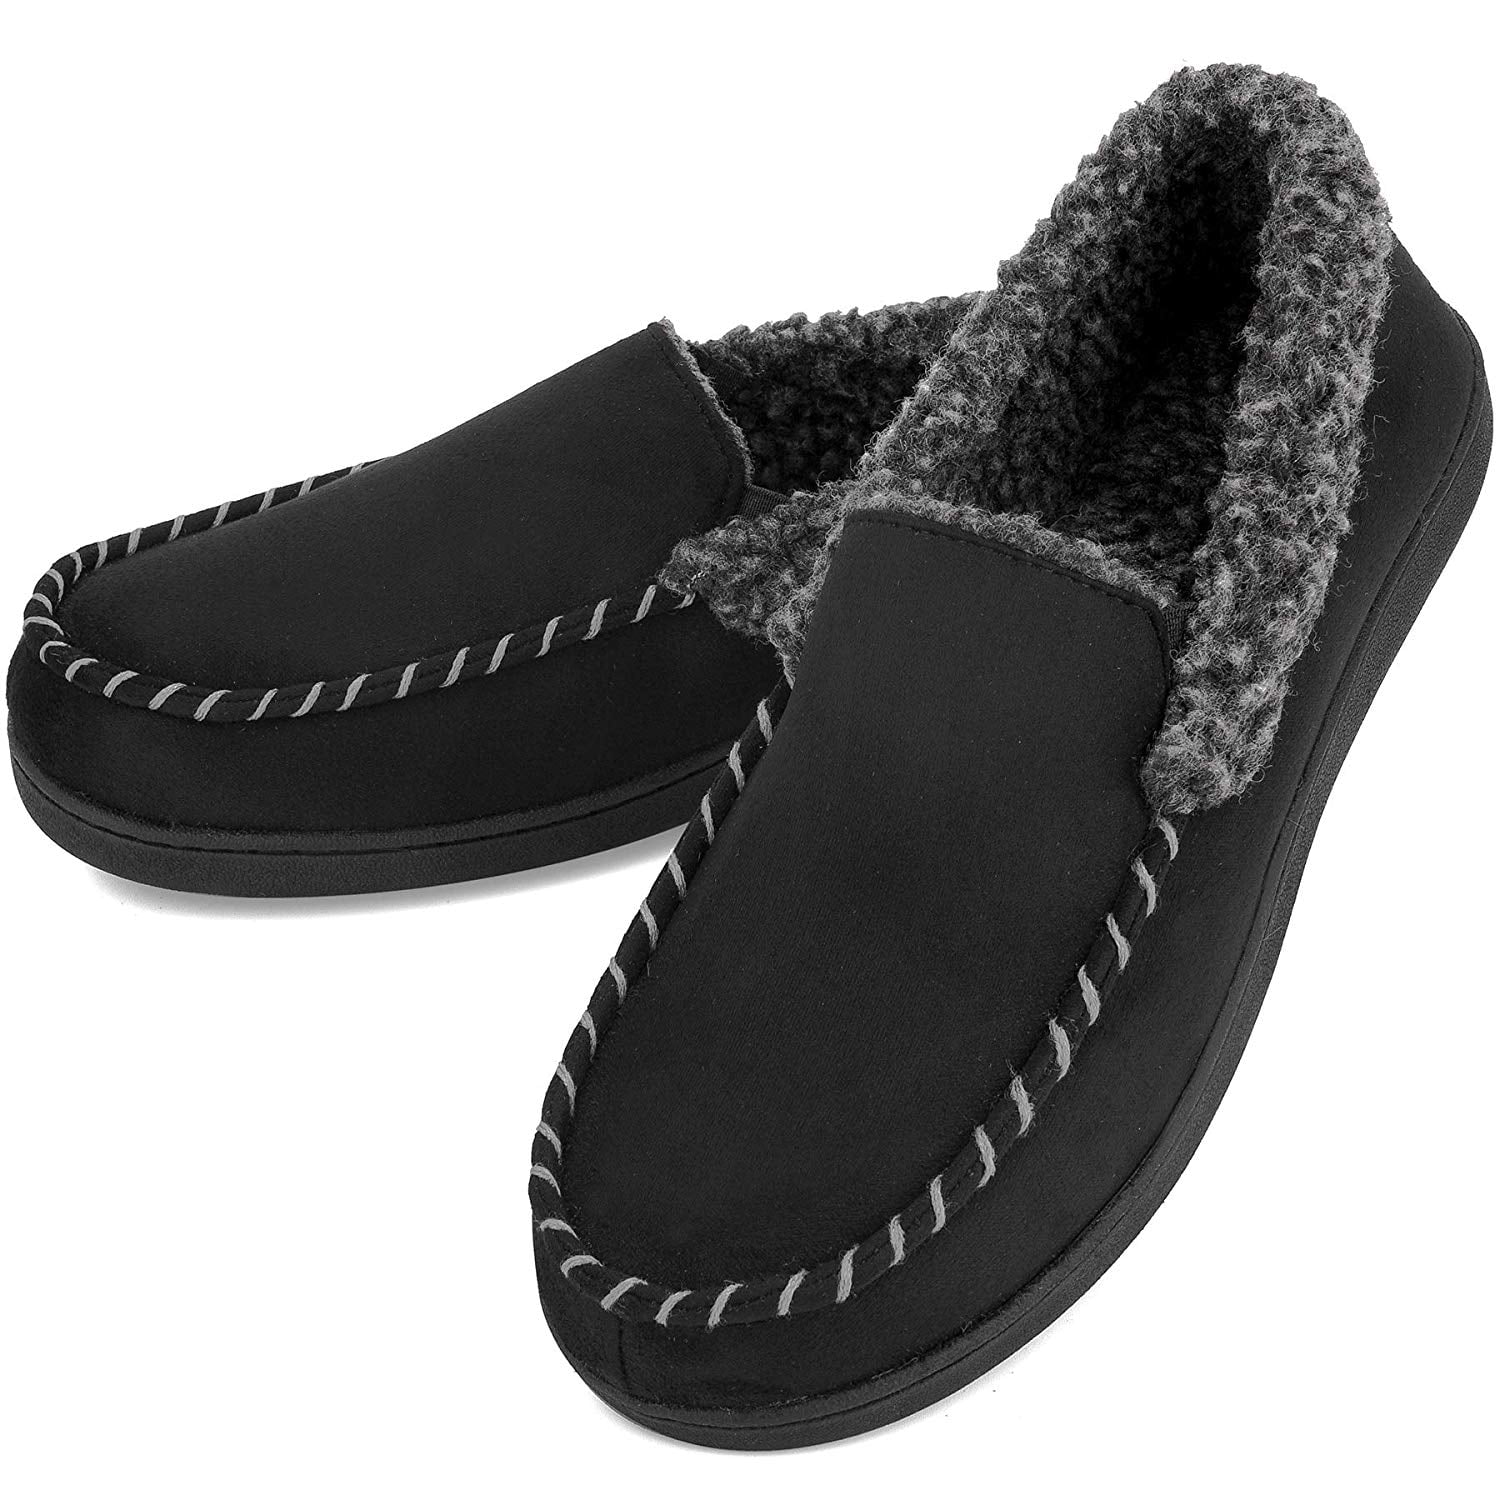 mens moccasin house shoes